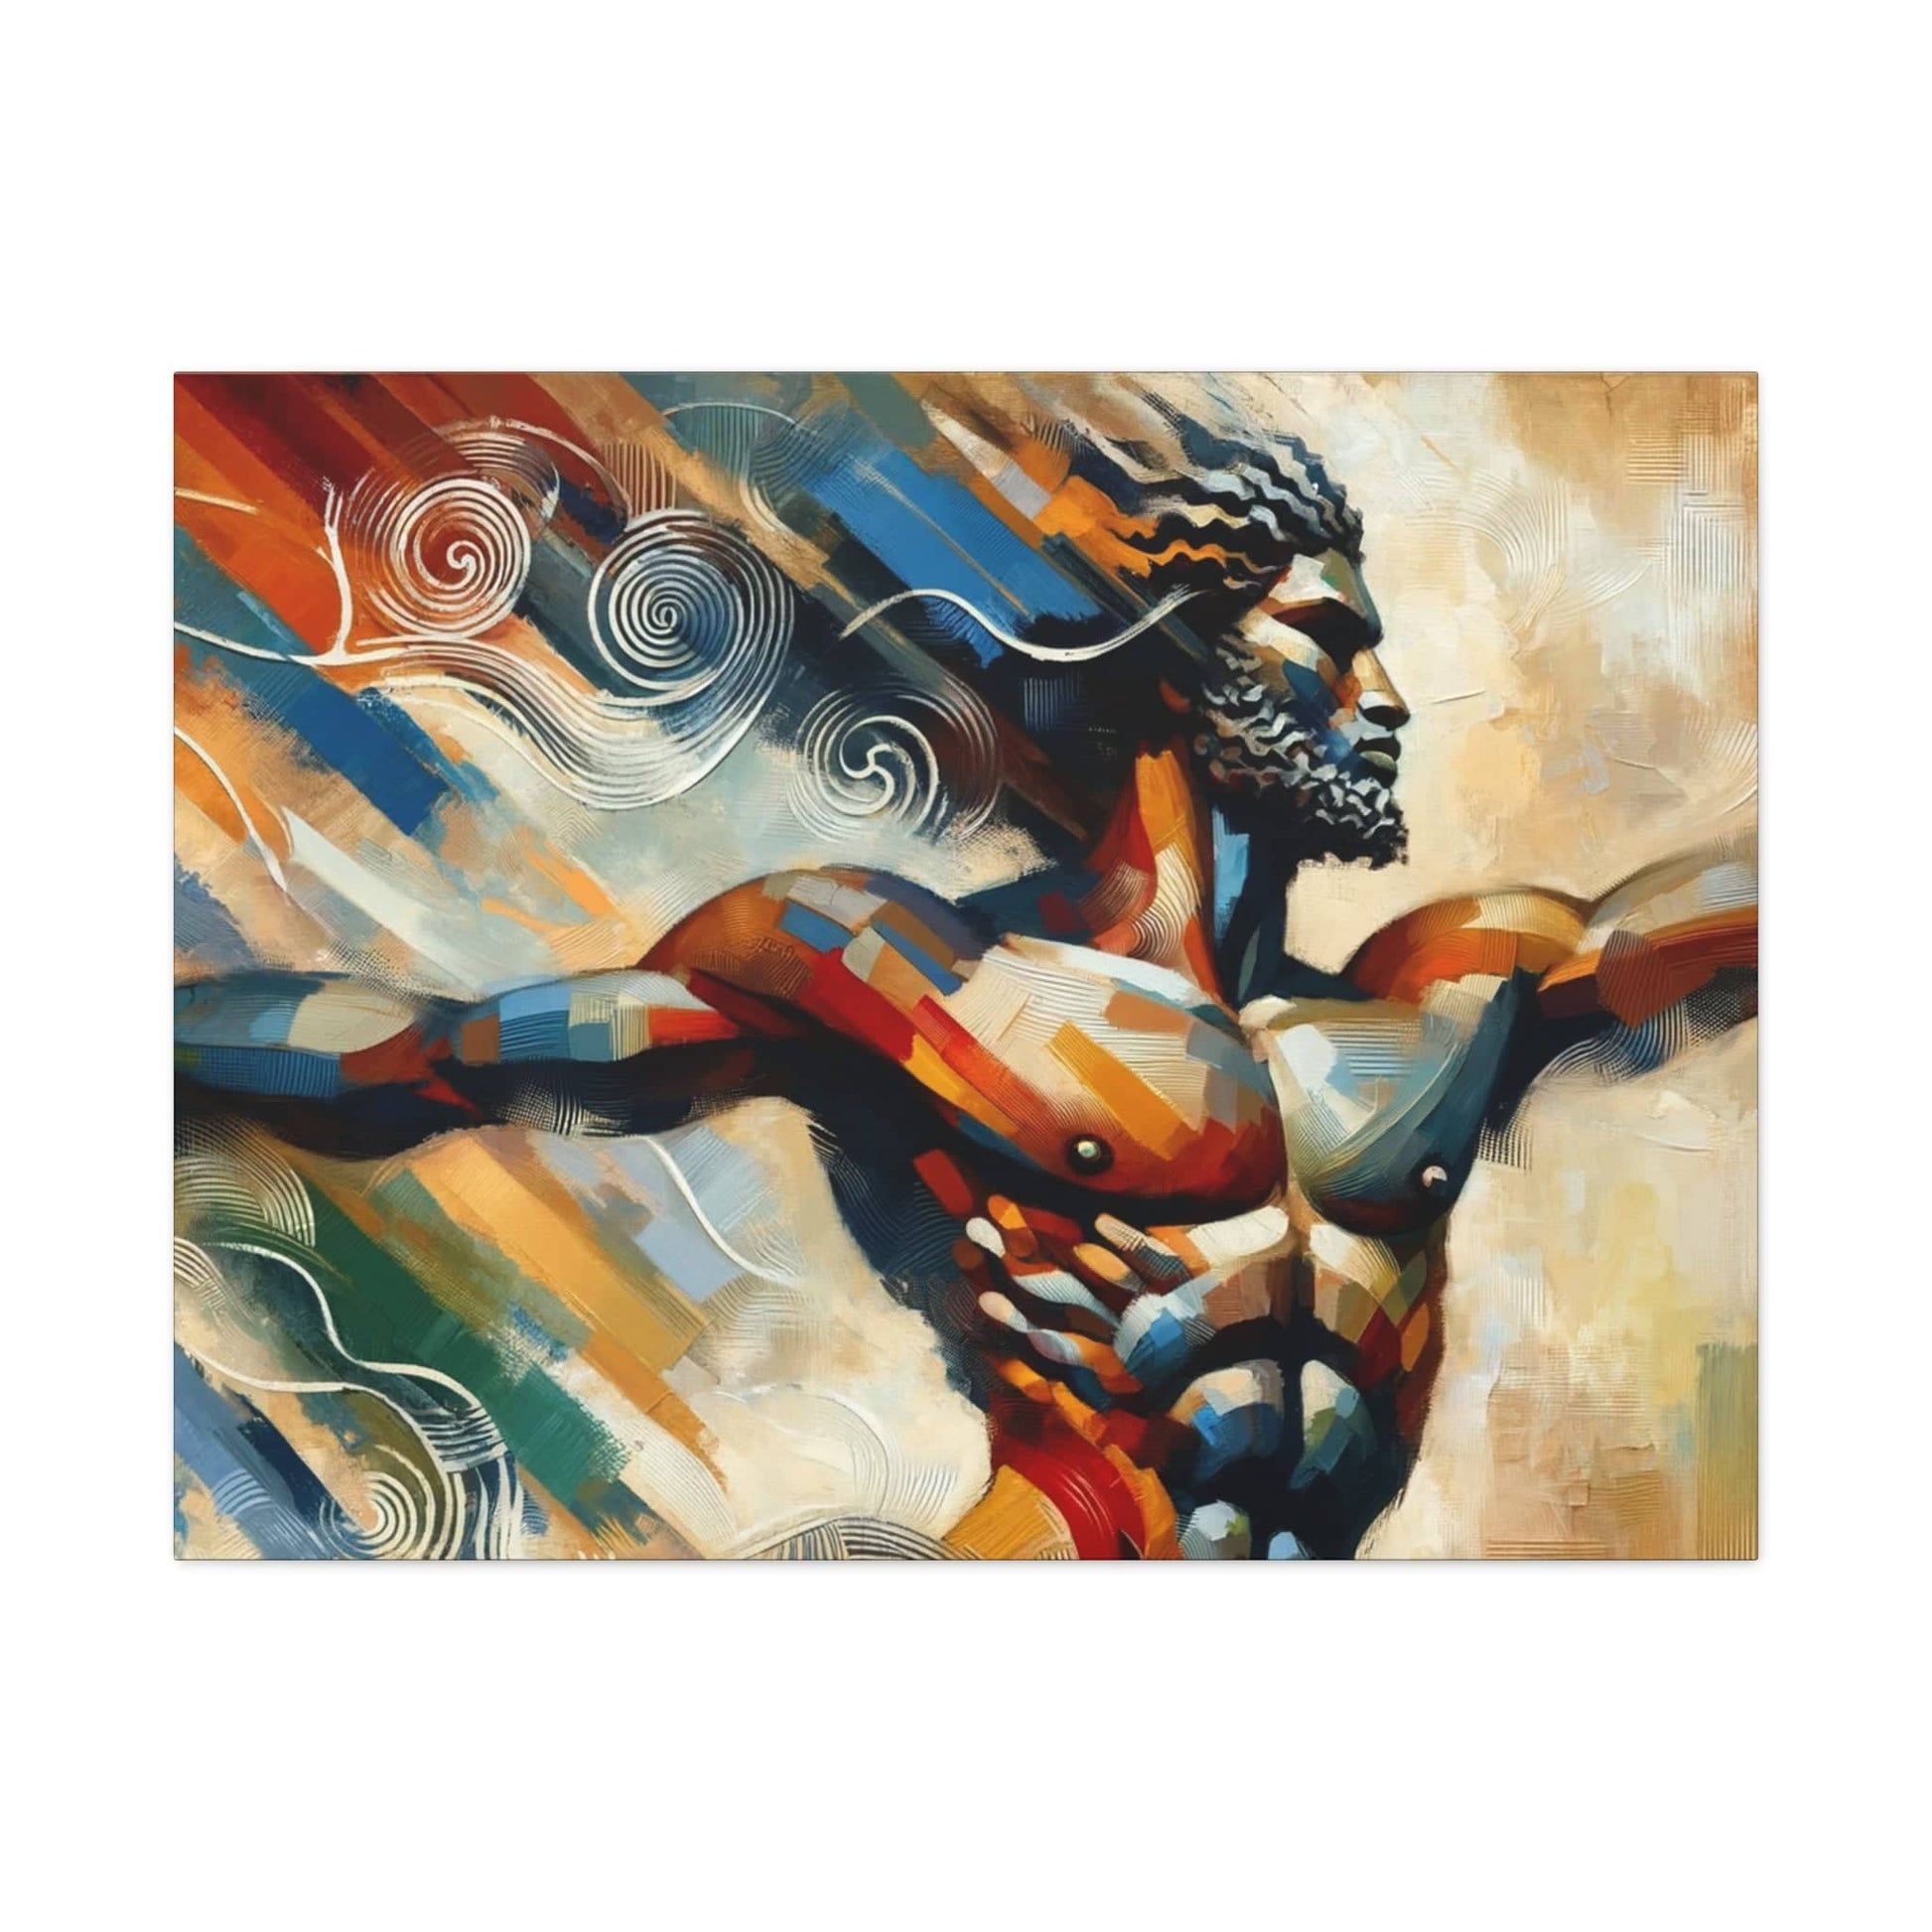 A Printify Whirlwind Warrior depicted in a painting with his arms outstretched, showcased as captivating canvas art.